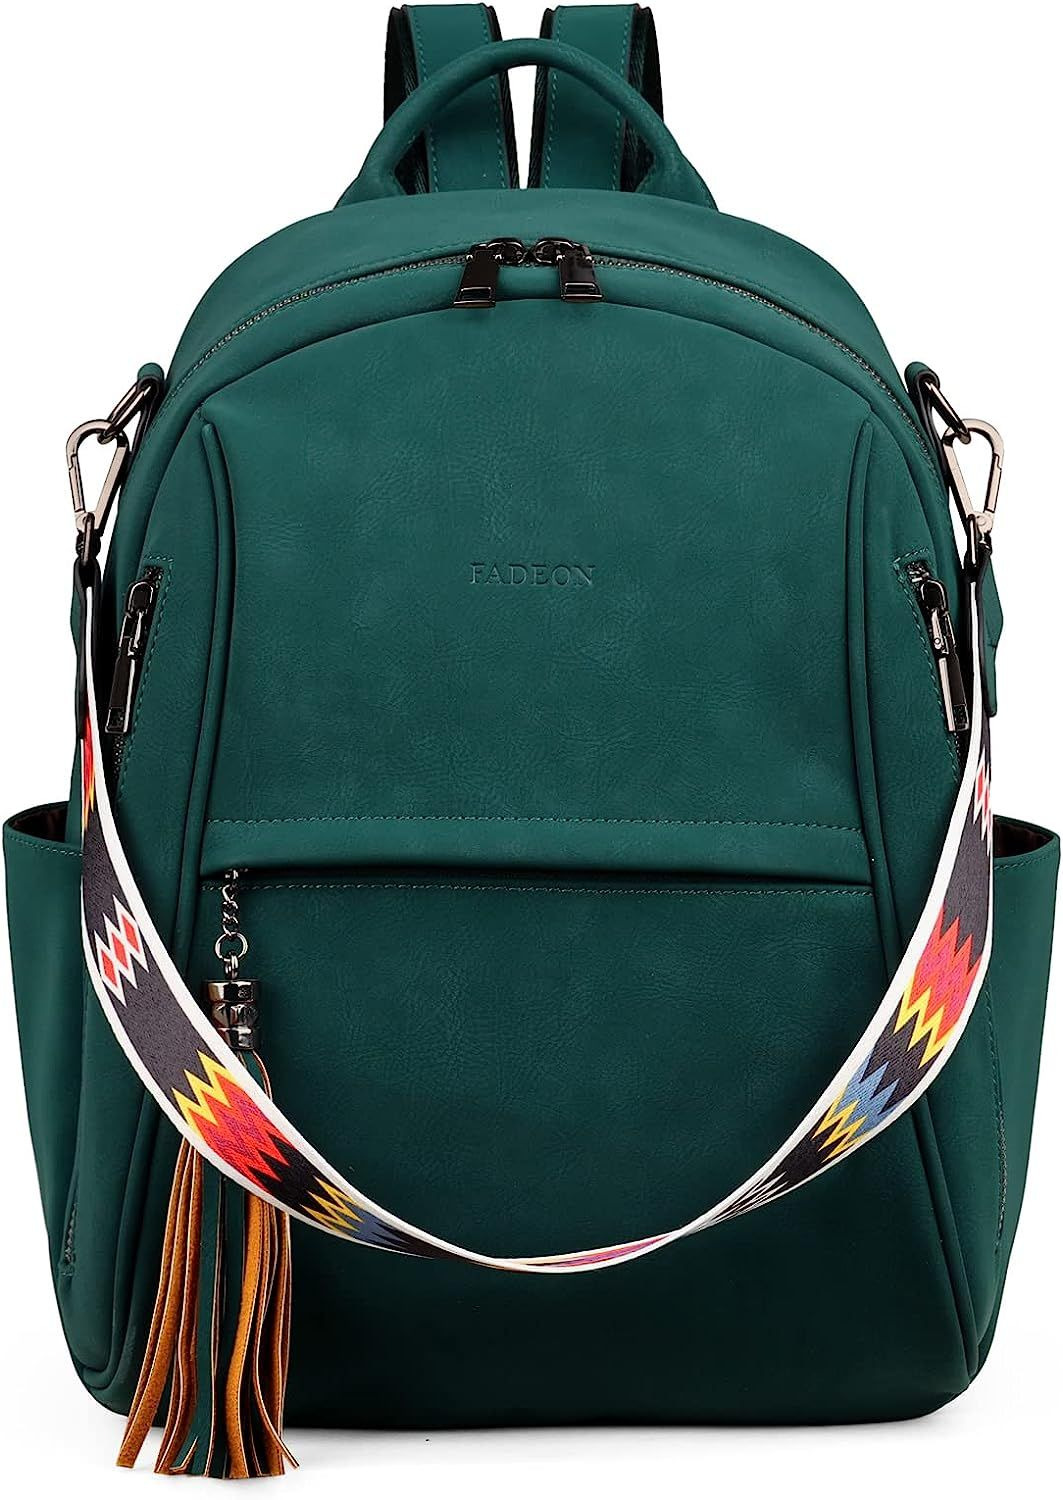 FADEON Backpack Purse for Small 13-in Height, R- Dark Green Nubuck Style 